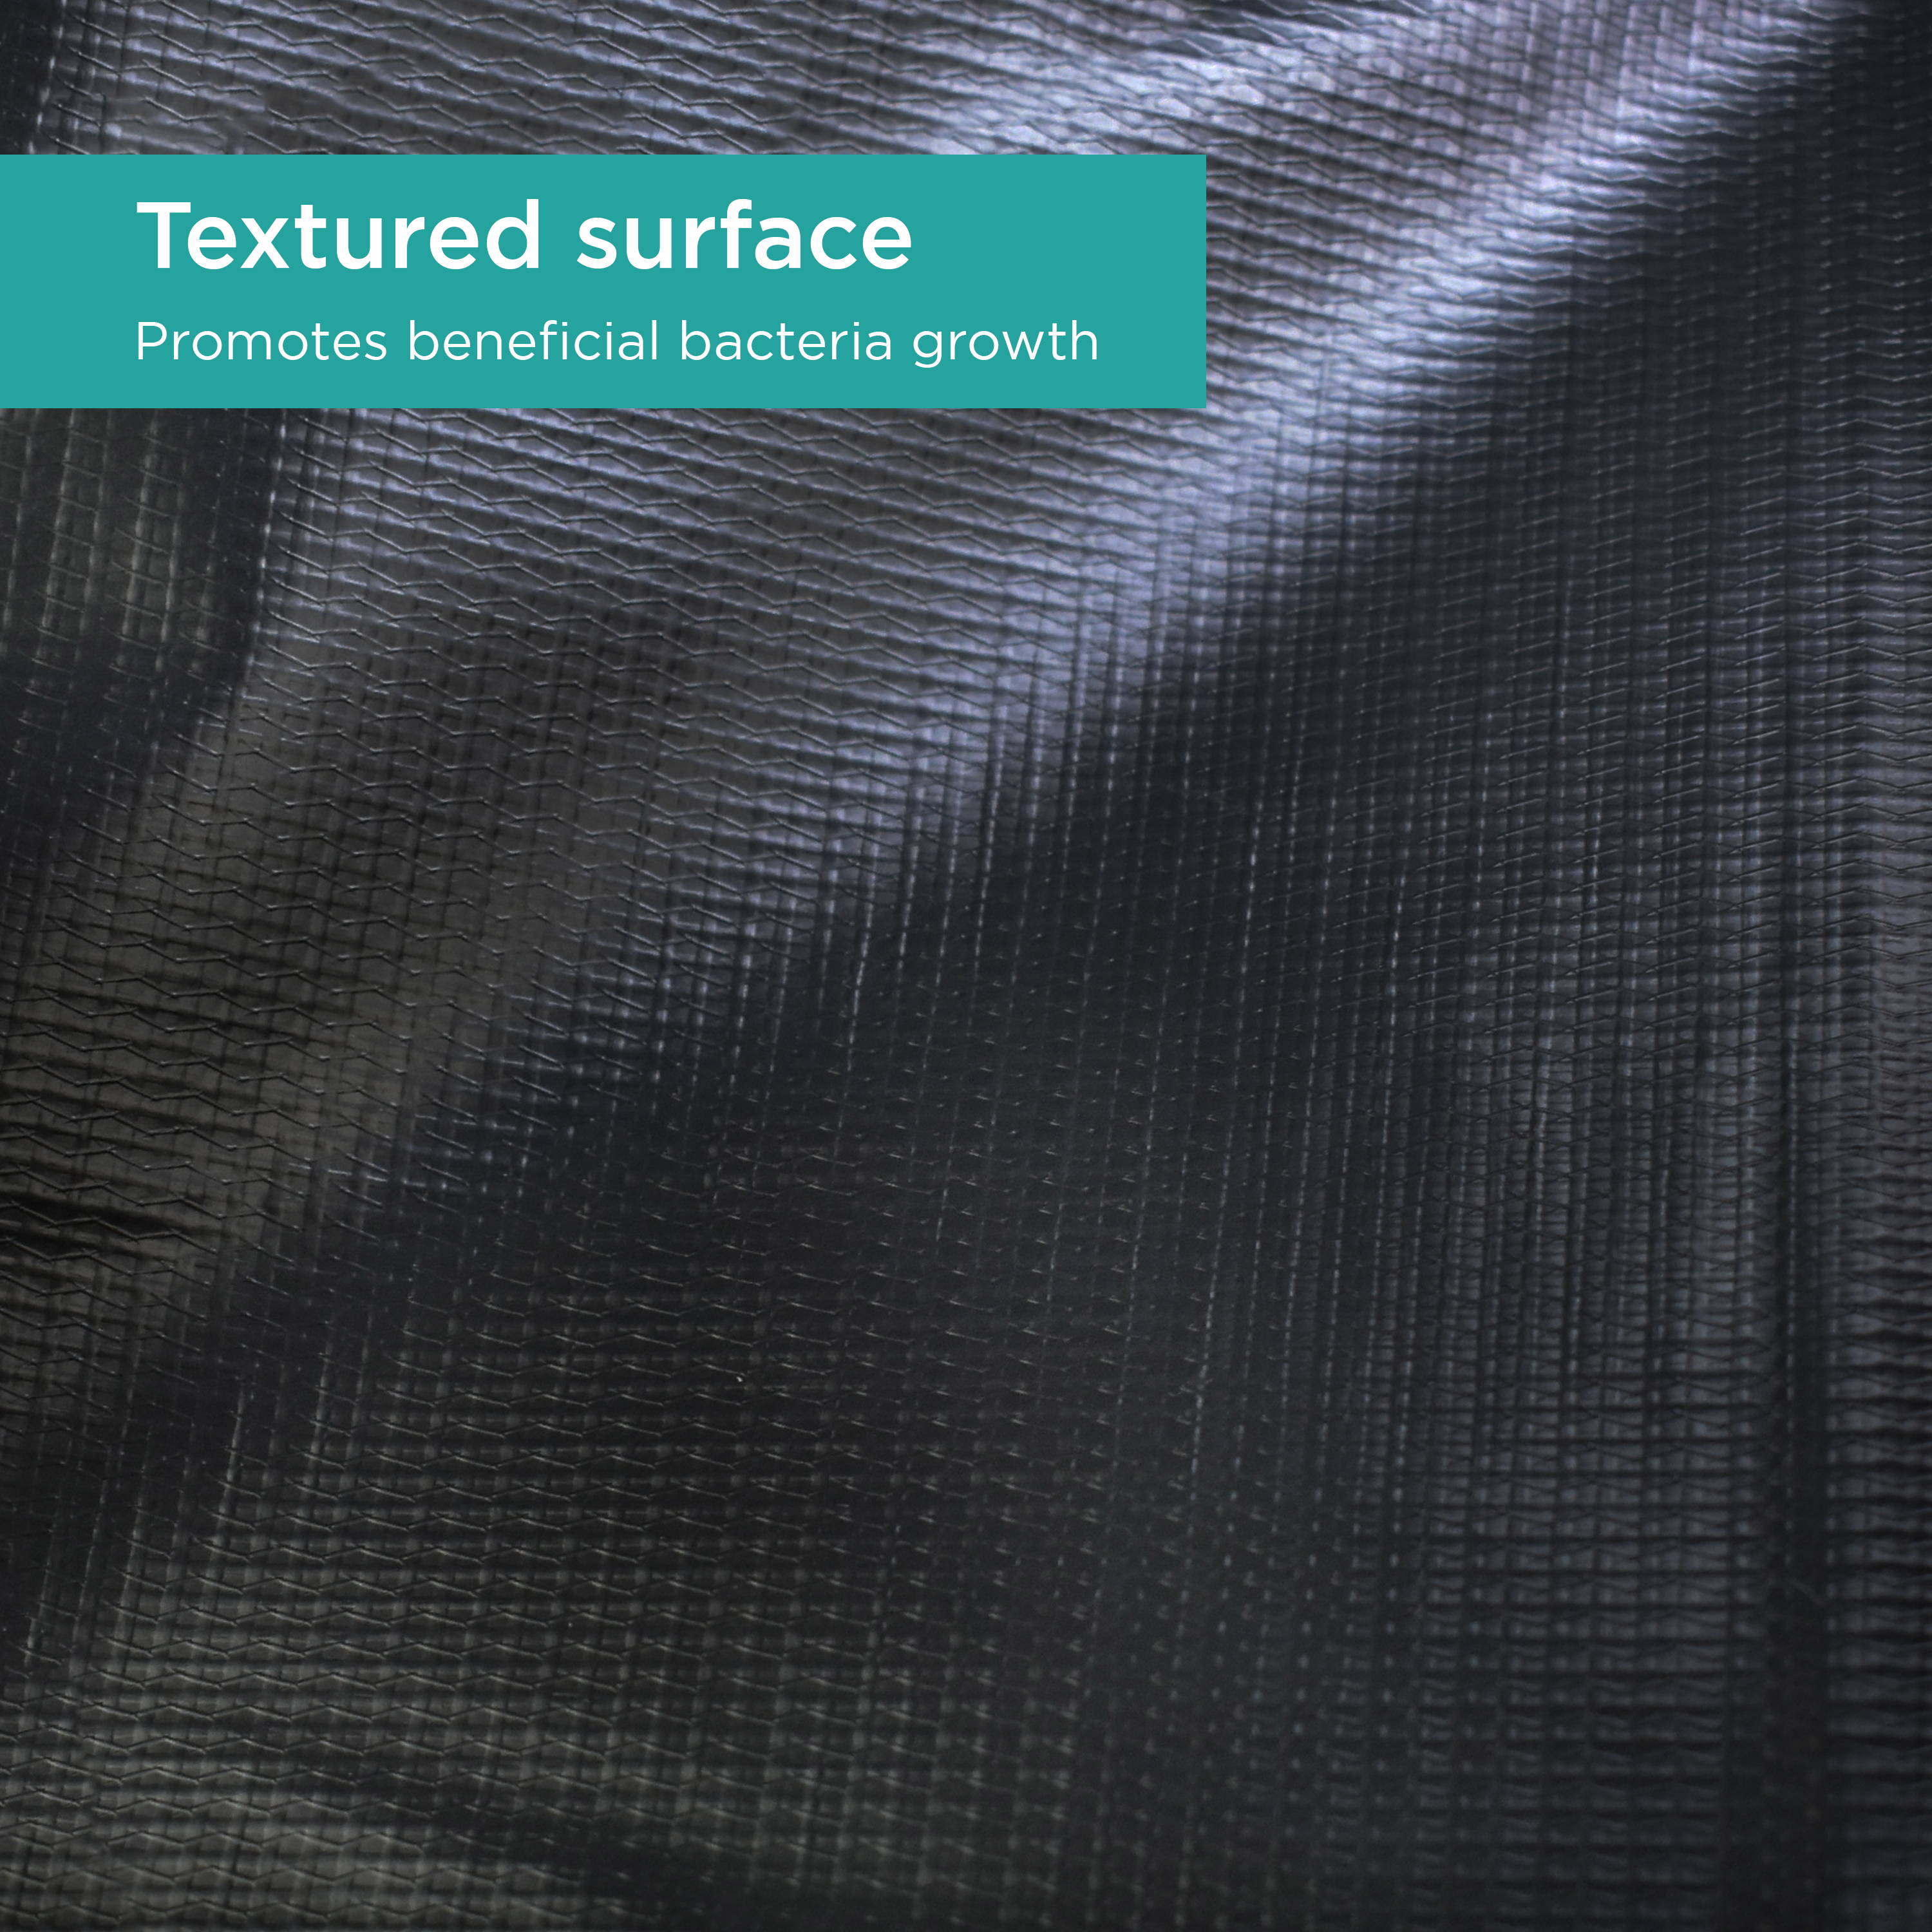 TotalPond pond liners have a textured surface